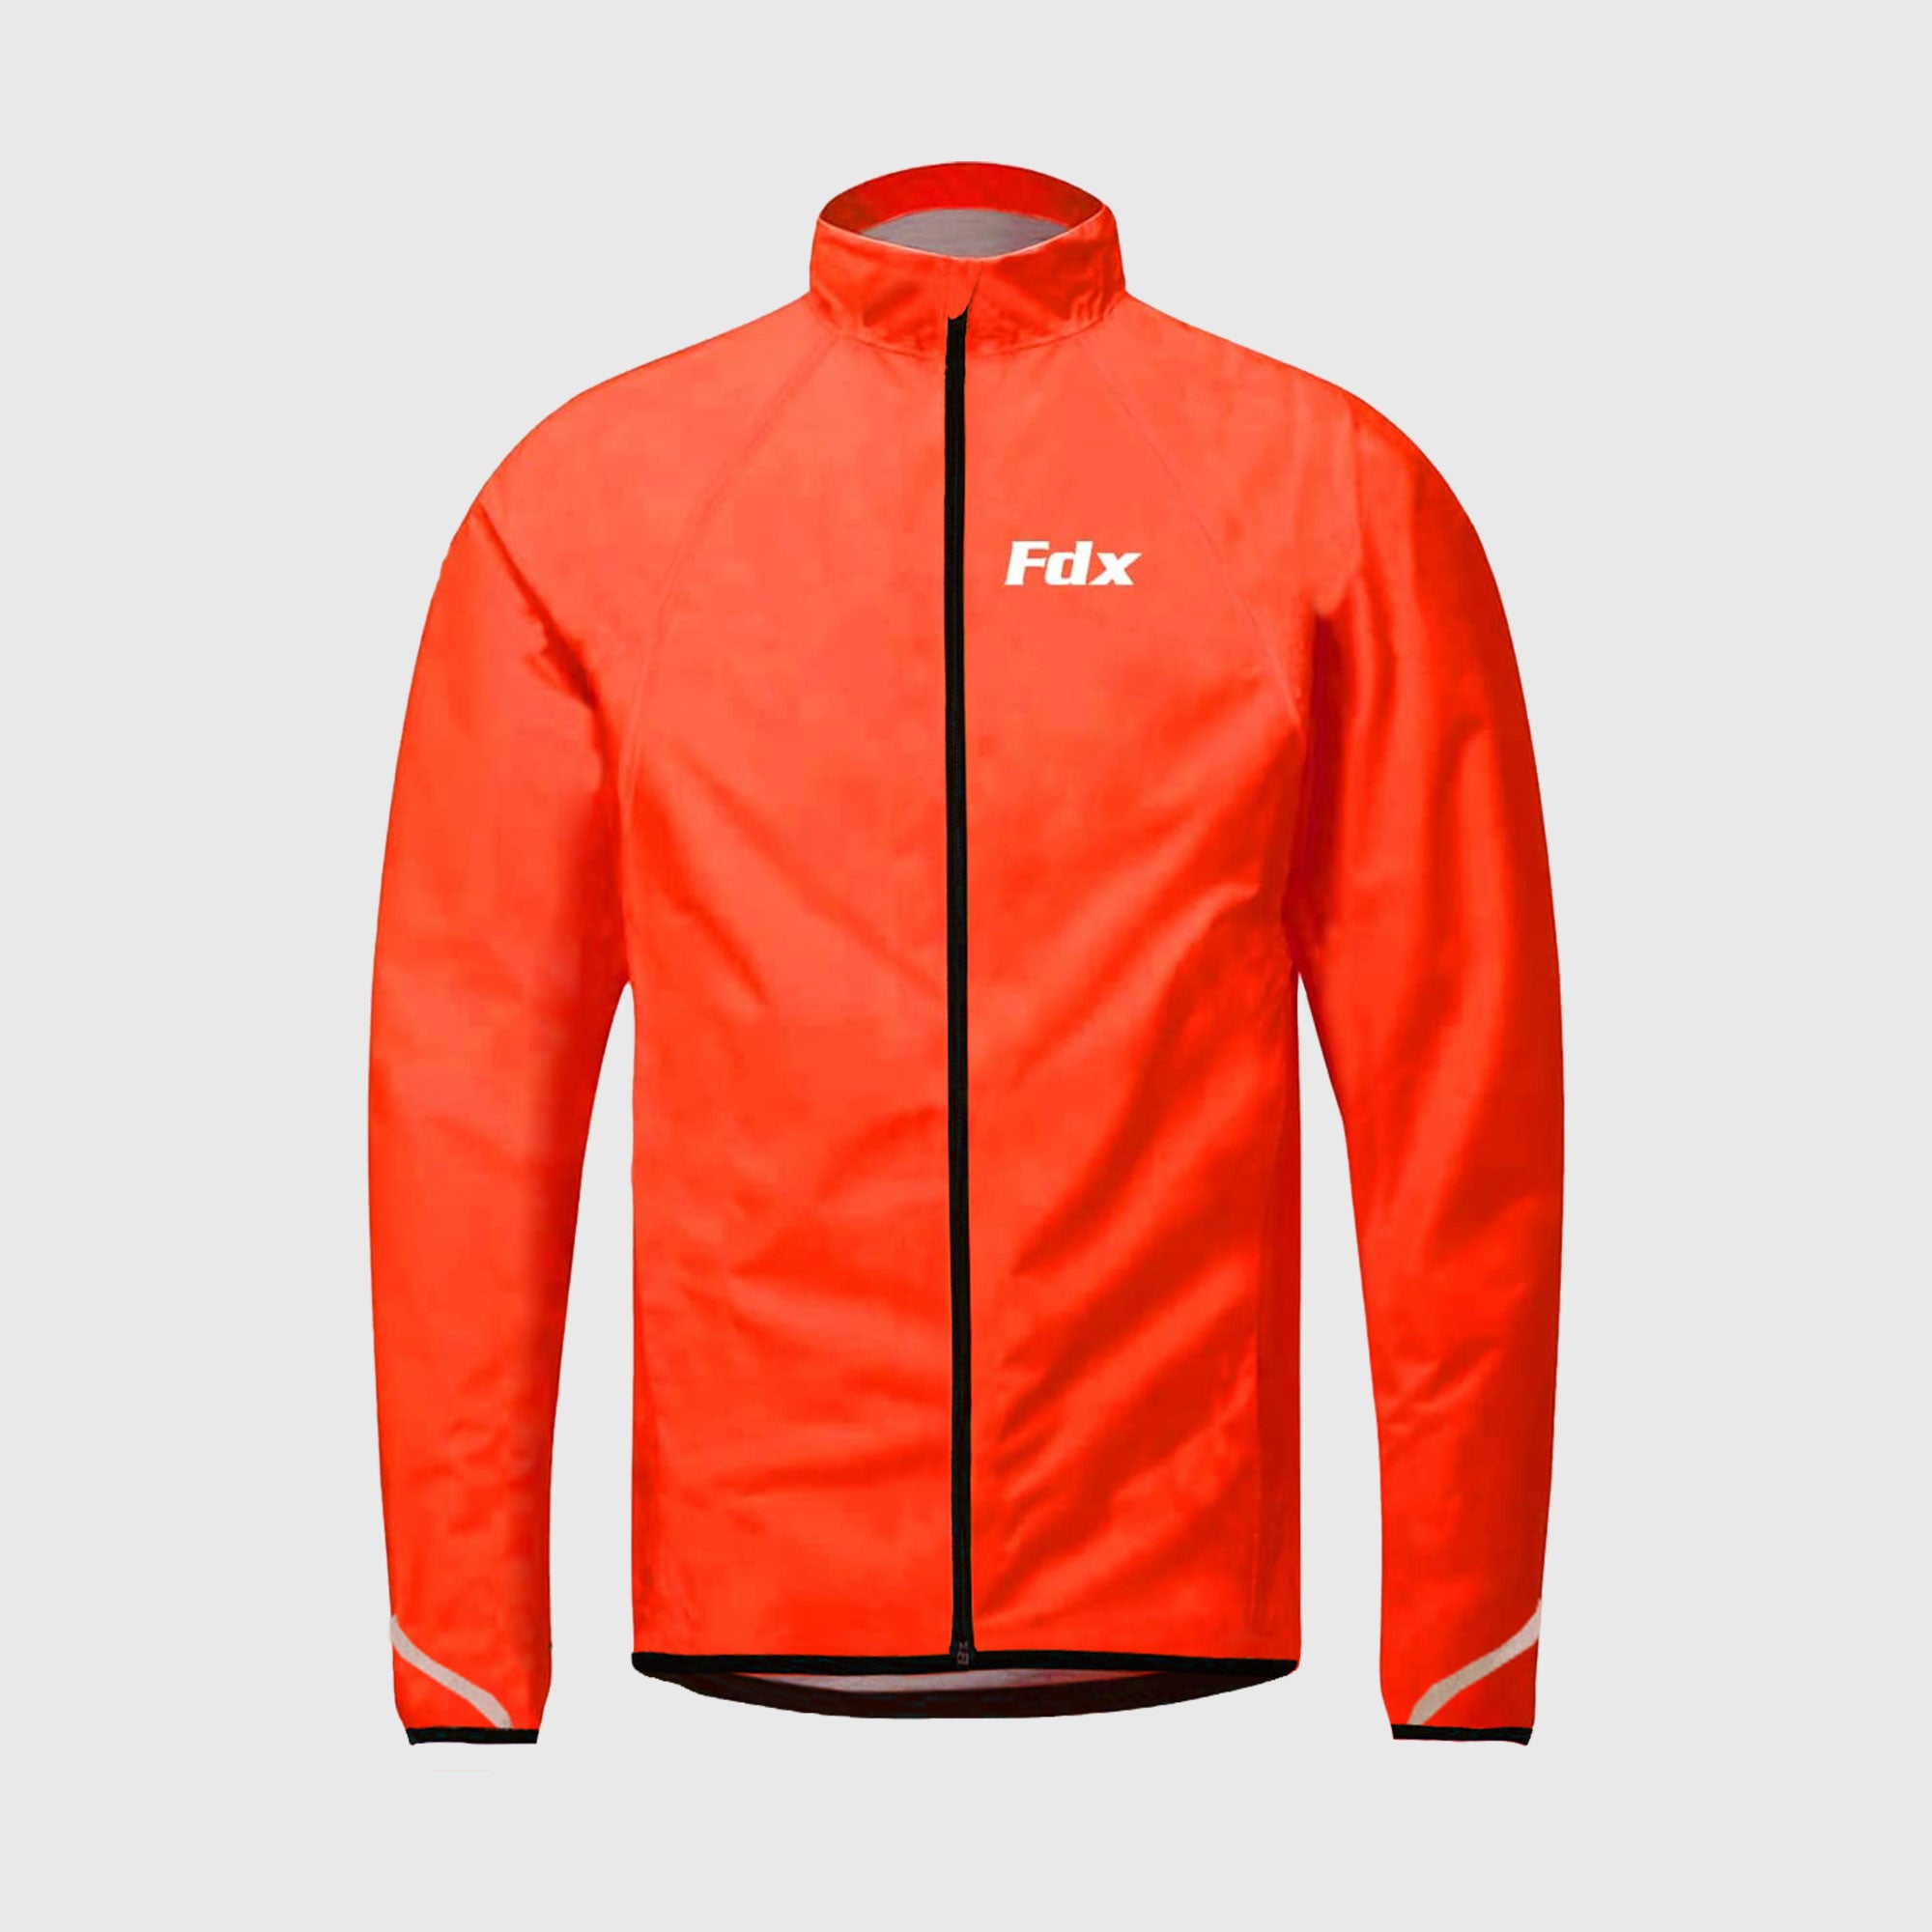 Fdx Men's Orange Best Cycling Jacket for Winter Thermal Casual Softshell Clothing Lightweight, Shaver proof, Packable ,Windproof, Waterproof & Pockets